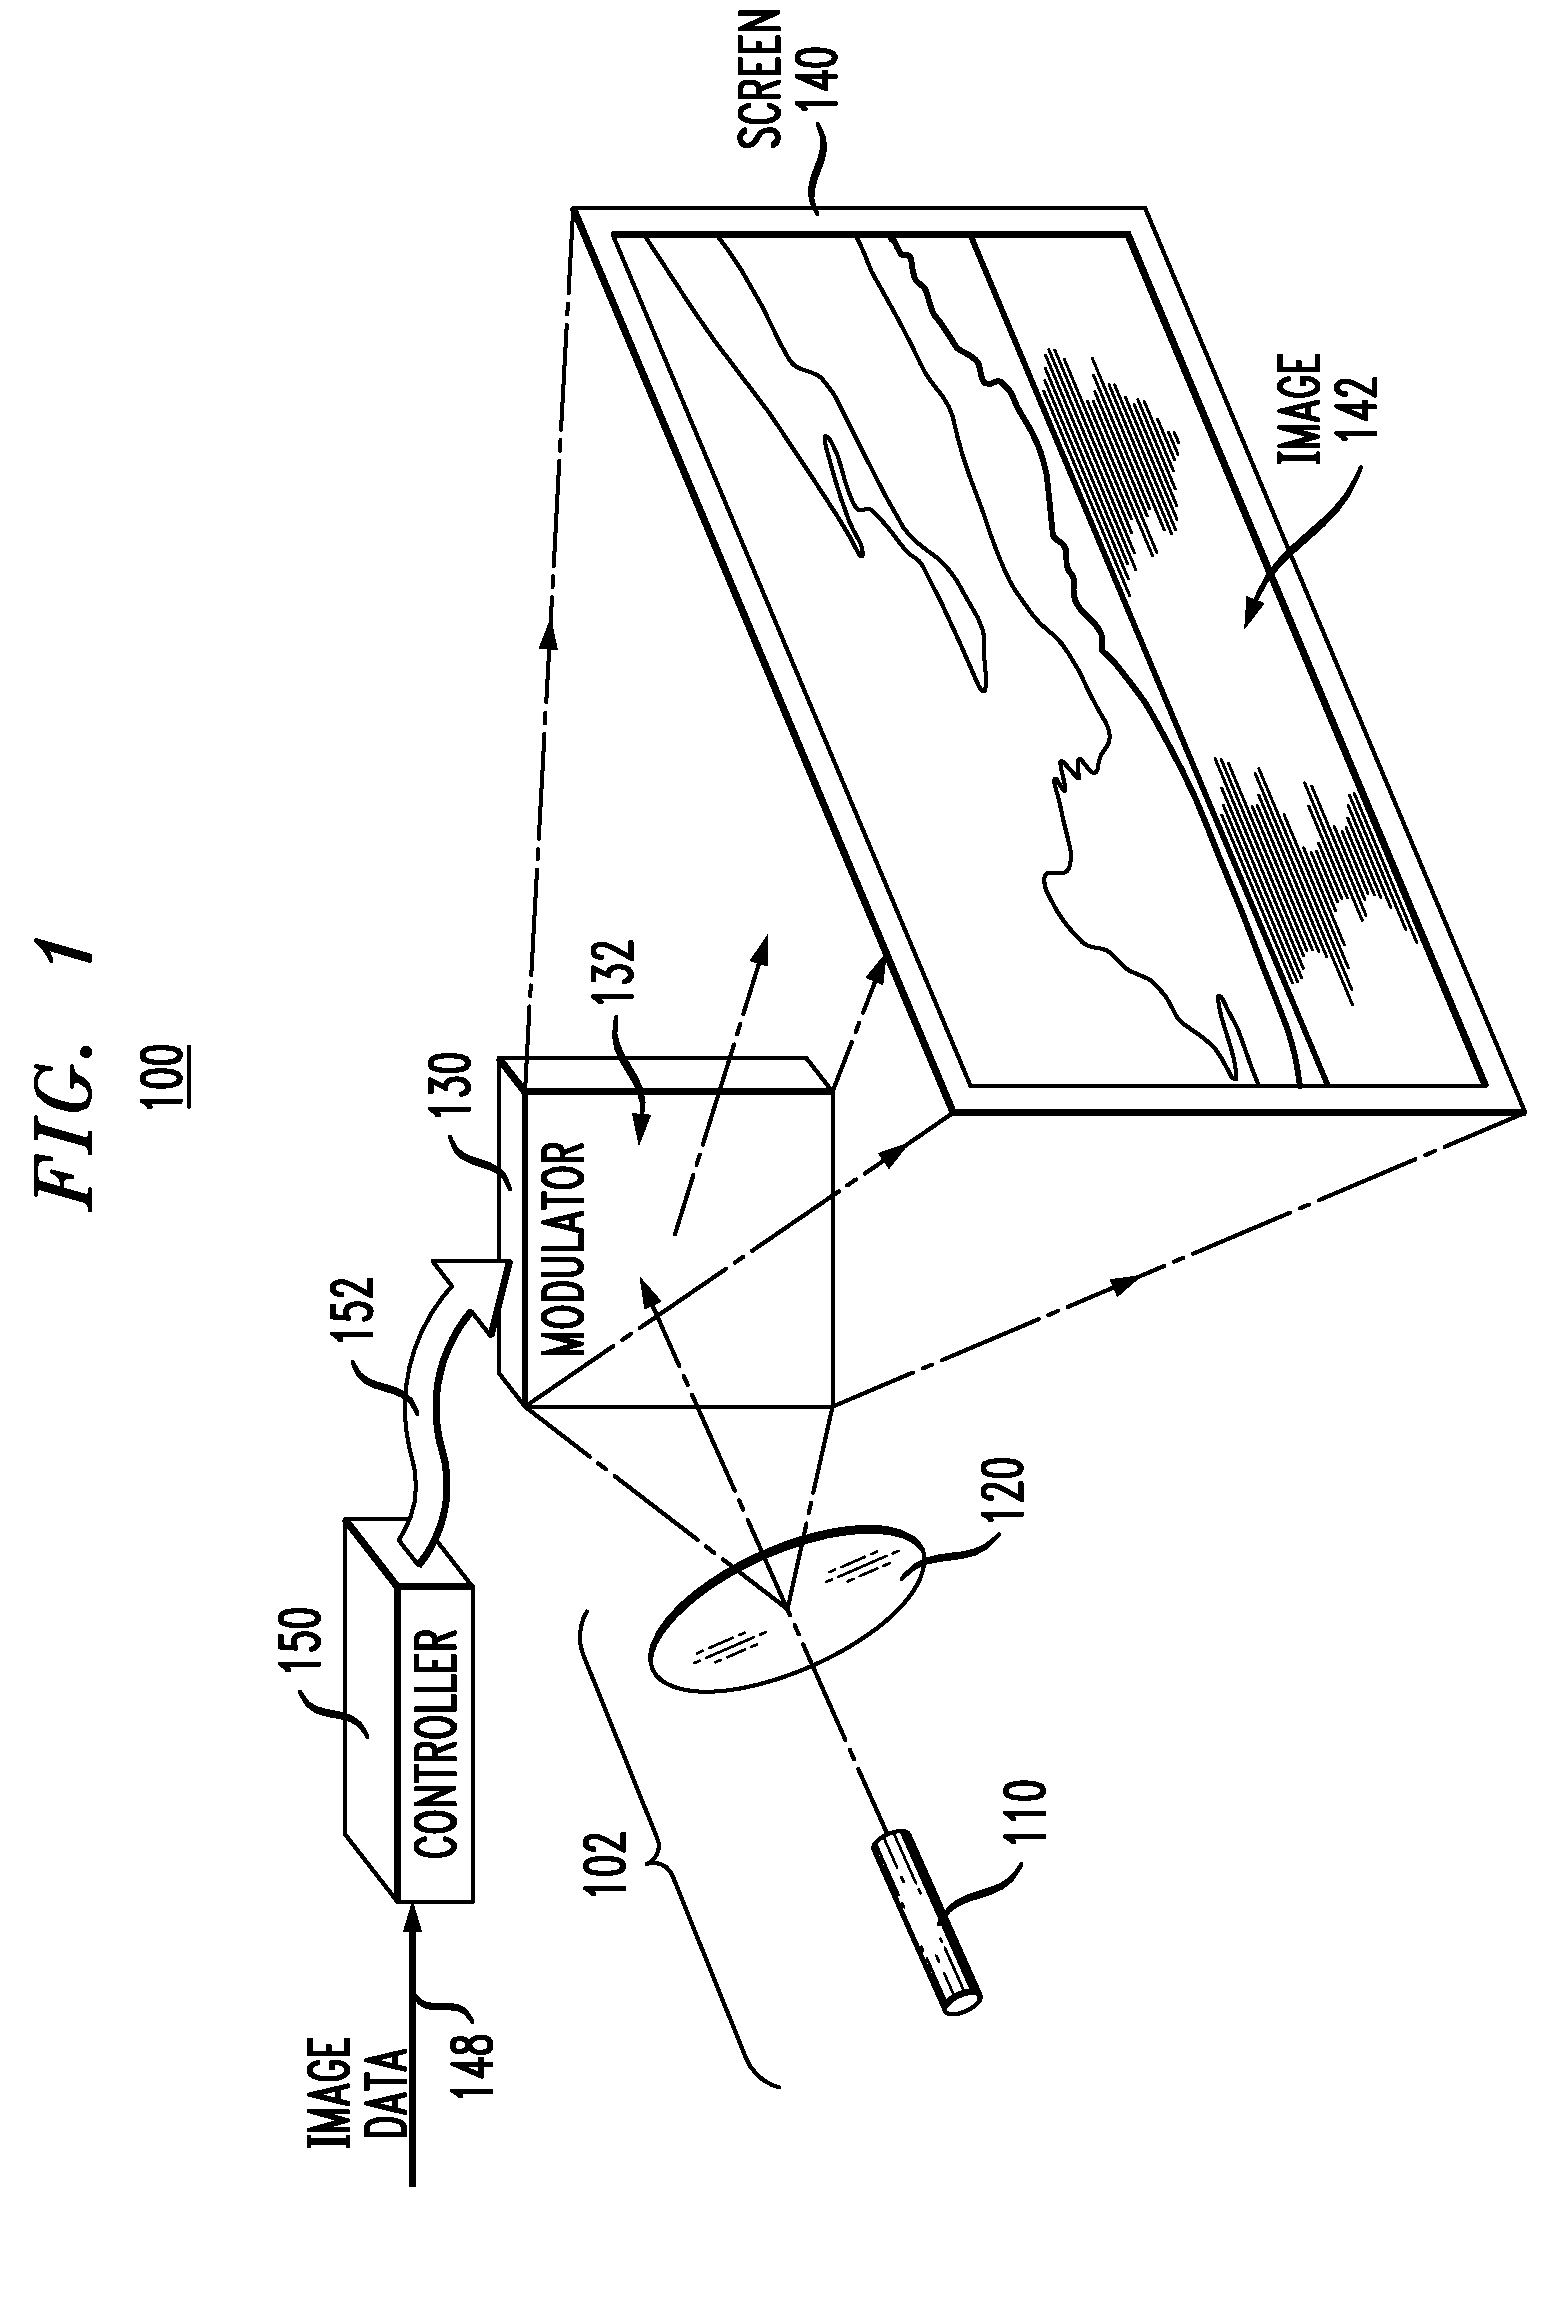 Speckle reduction using a tunable liquid lens